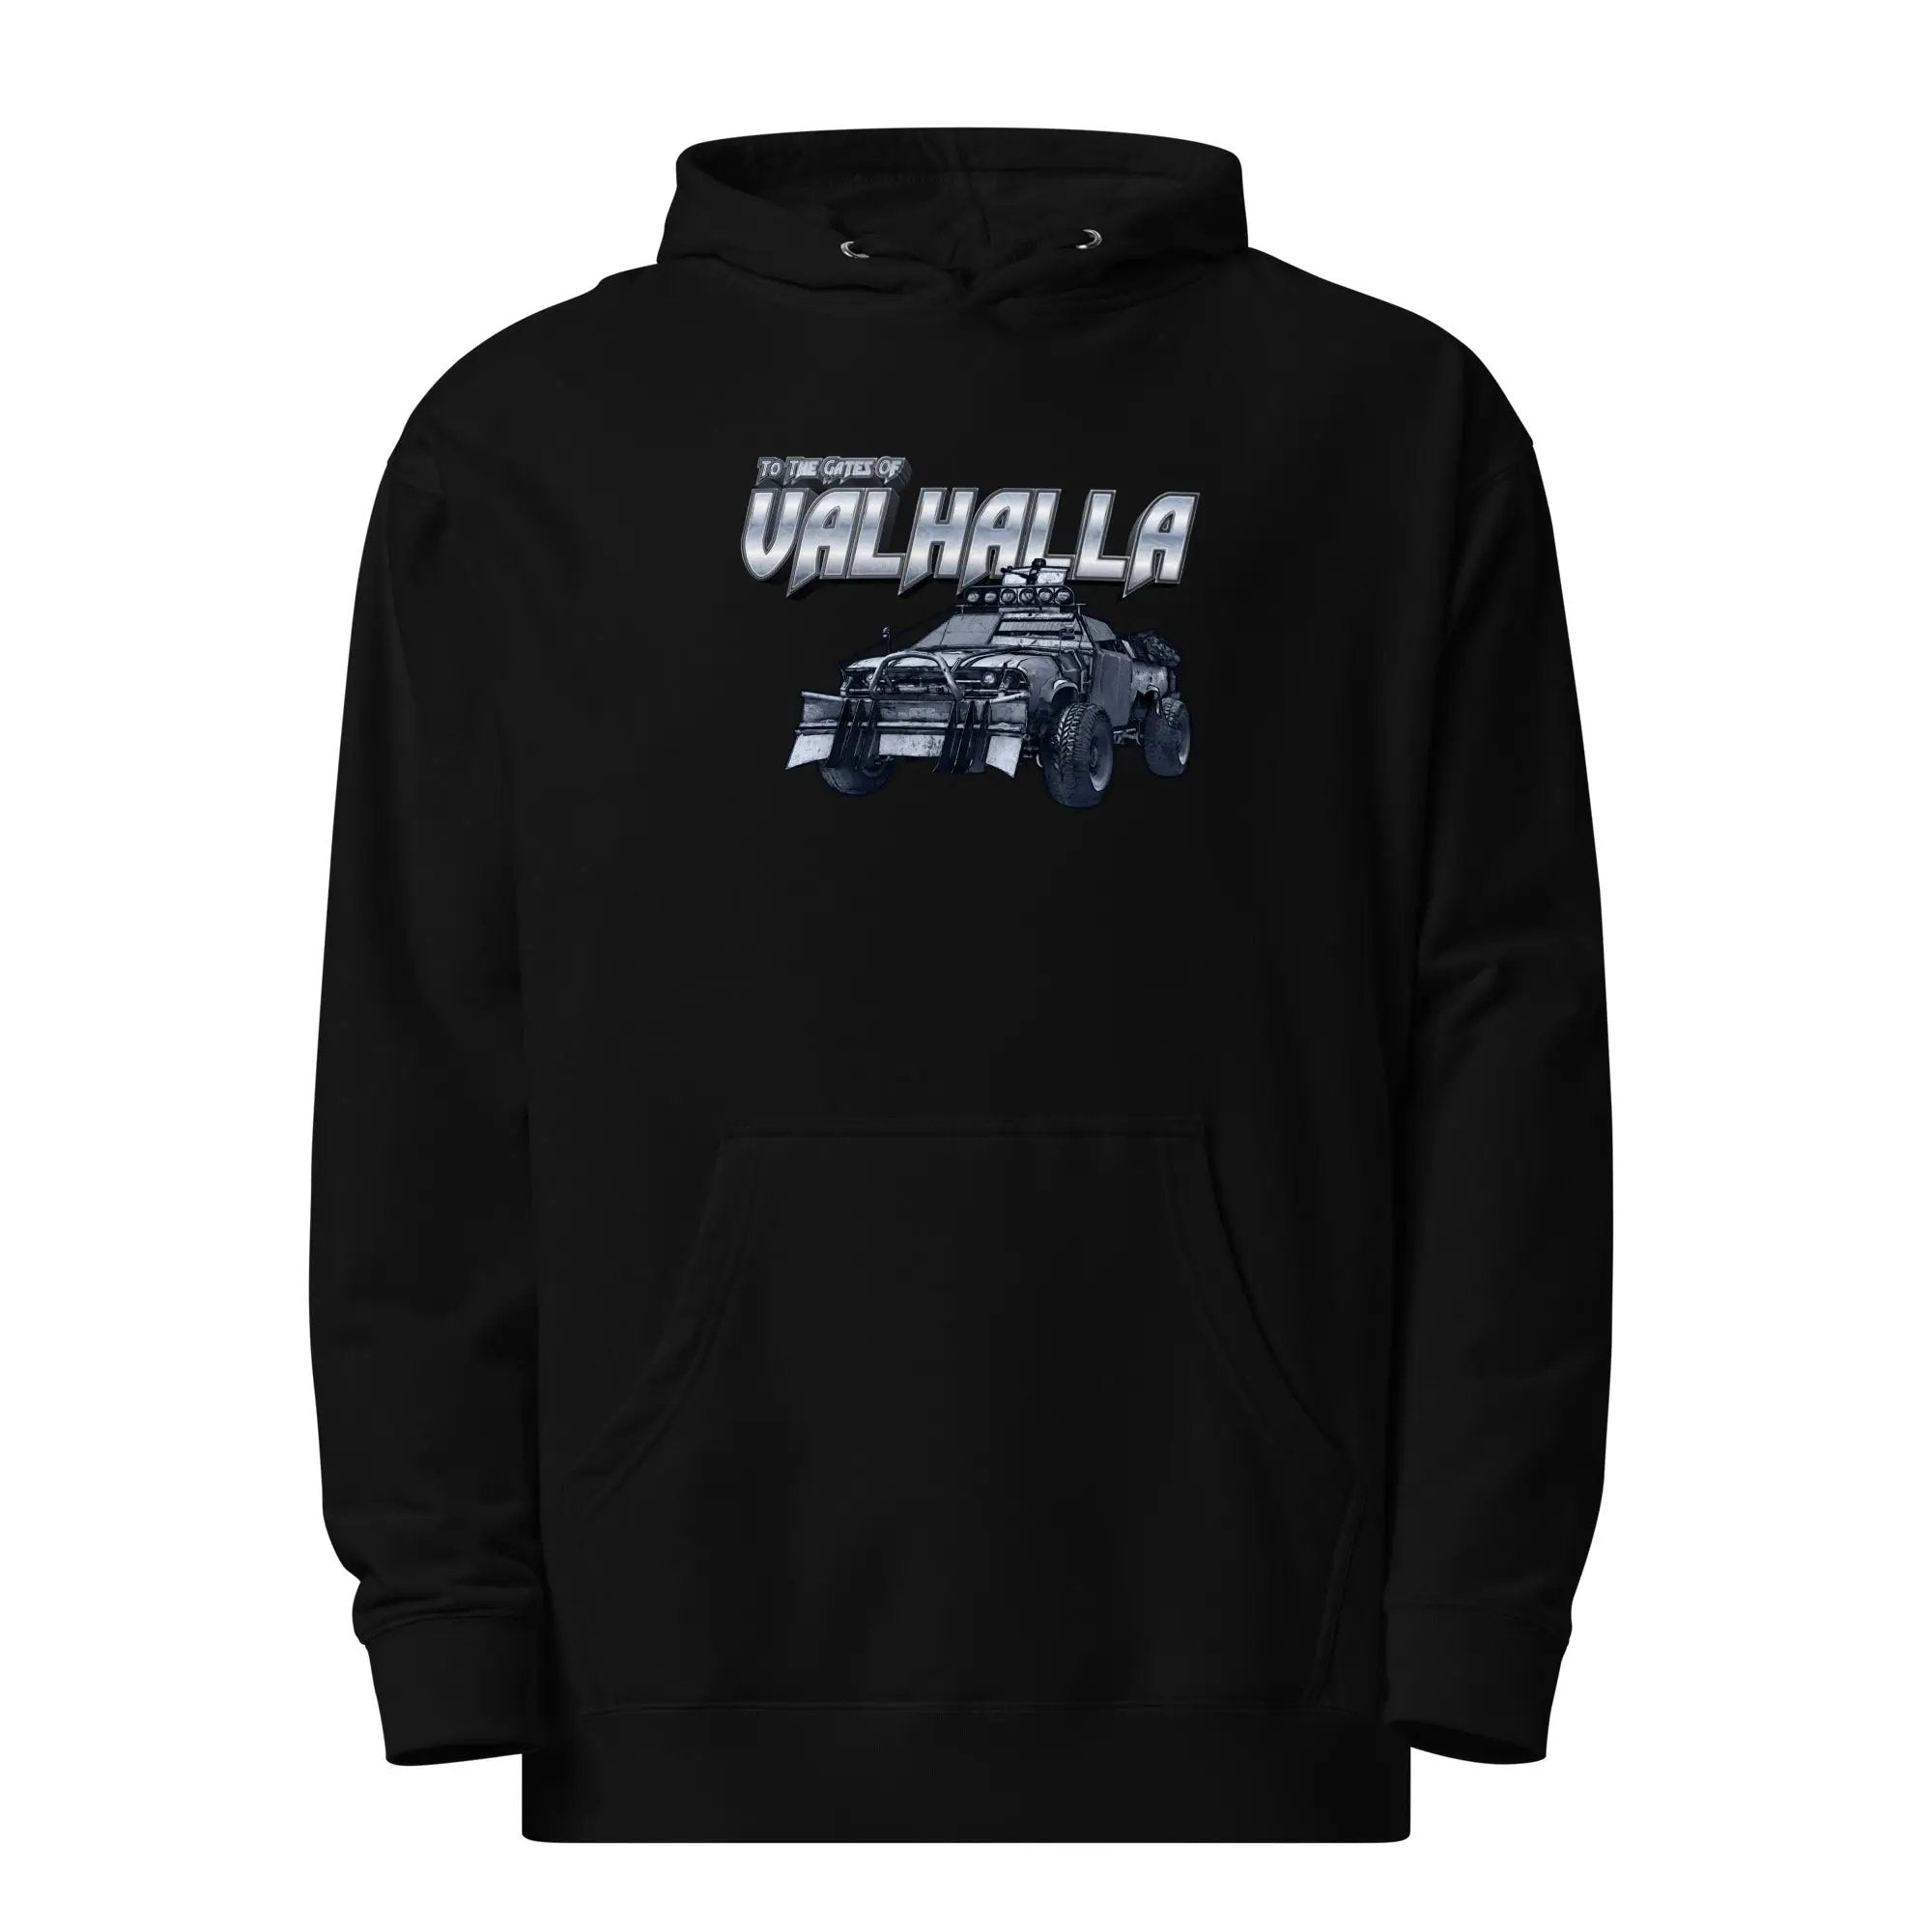 To The Gates of Valhalla Unisex midweight hoodie